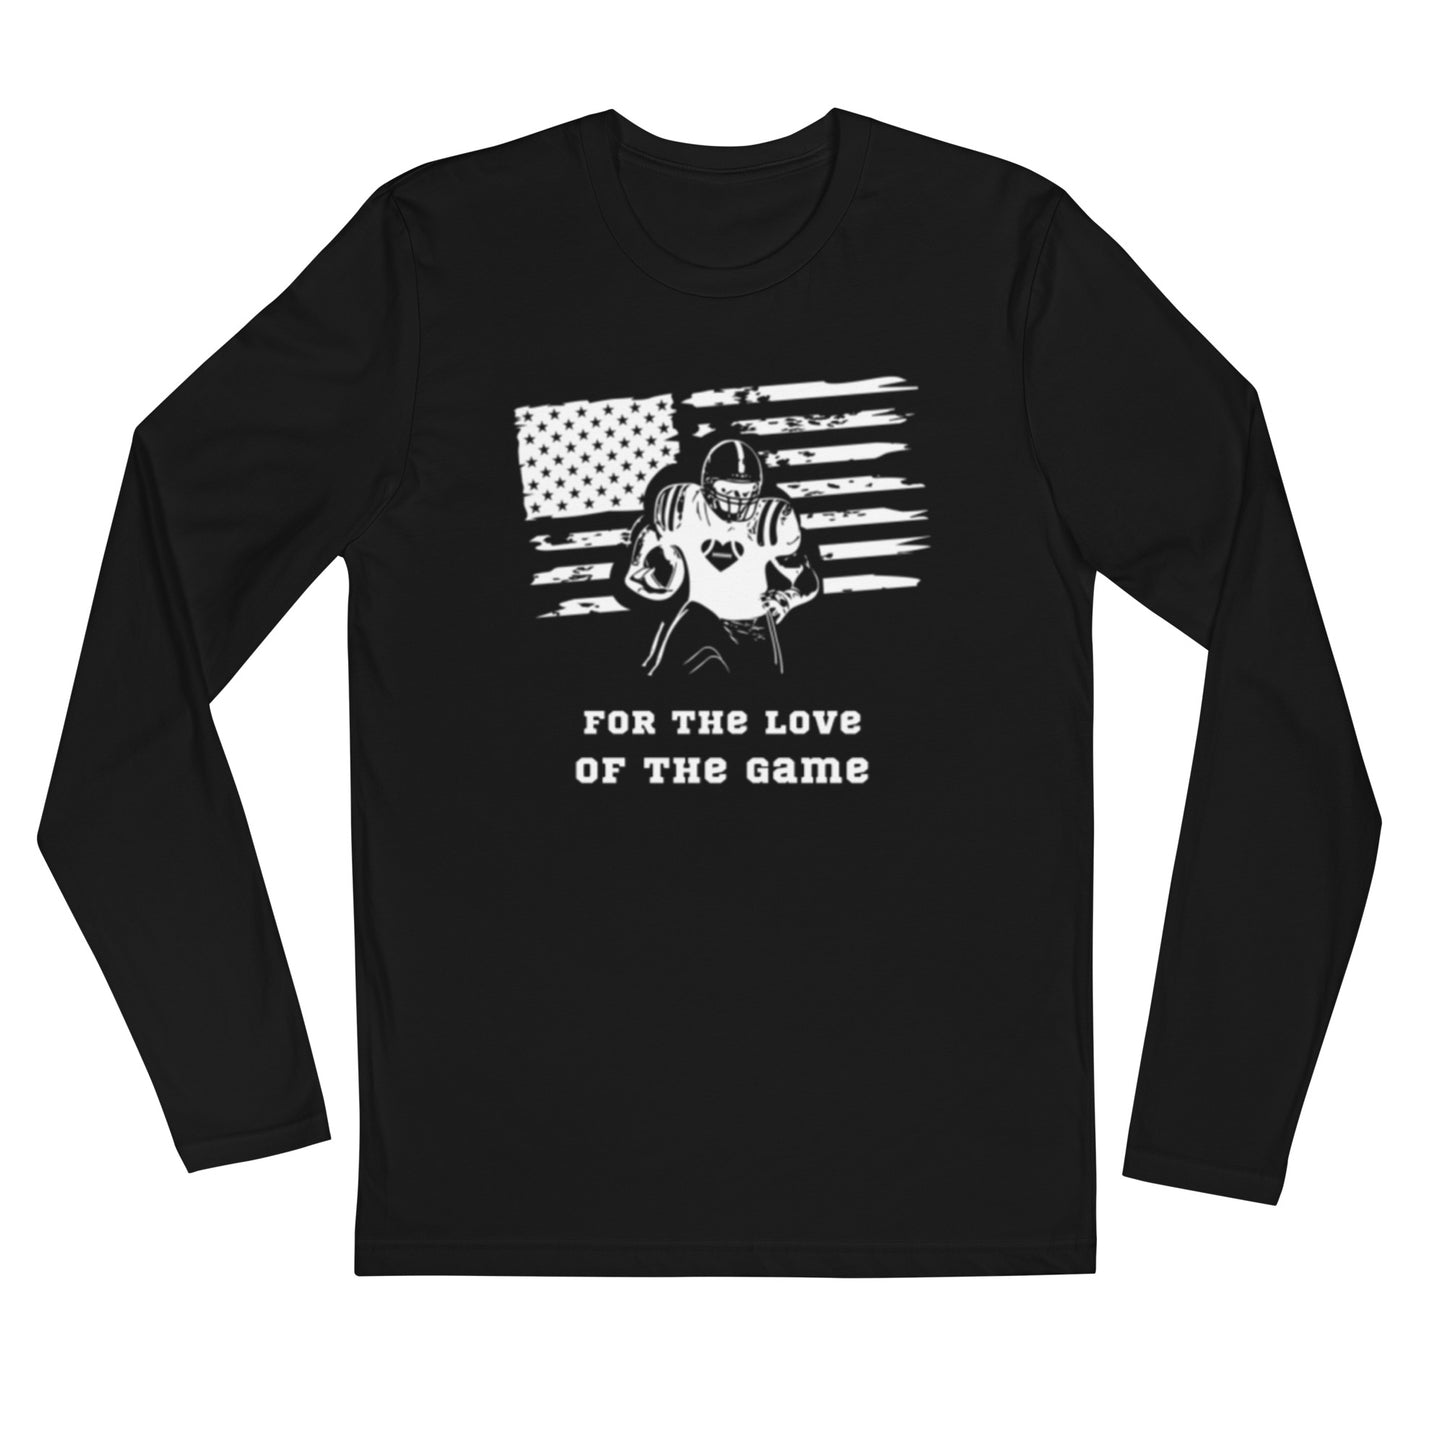 AFA American Football For The Love Of The game Men’s Long Sleeve Fitted Crew Neck Top